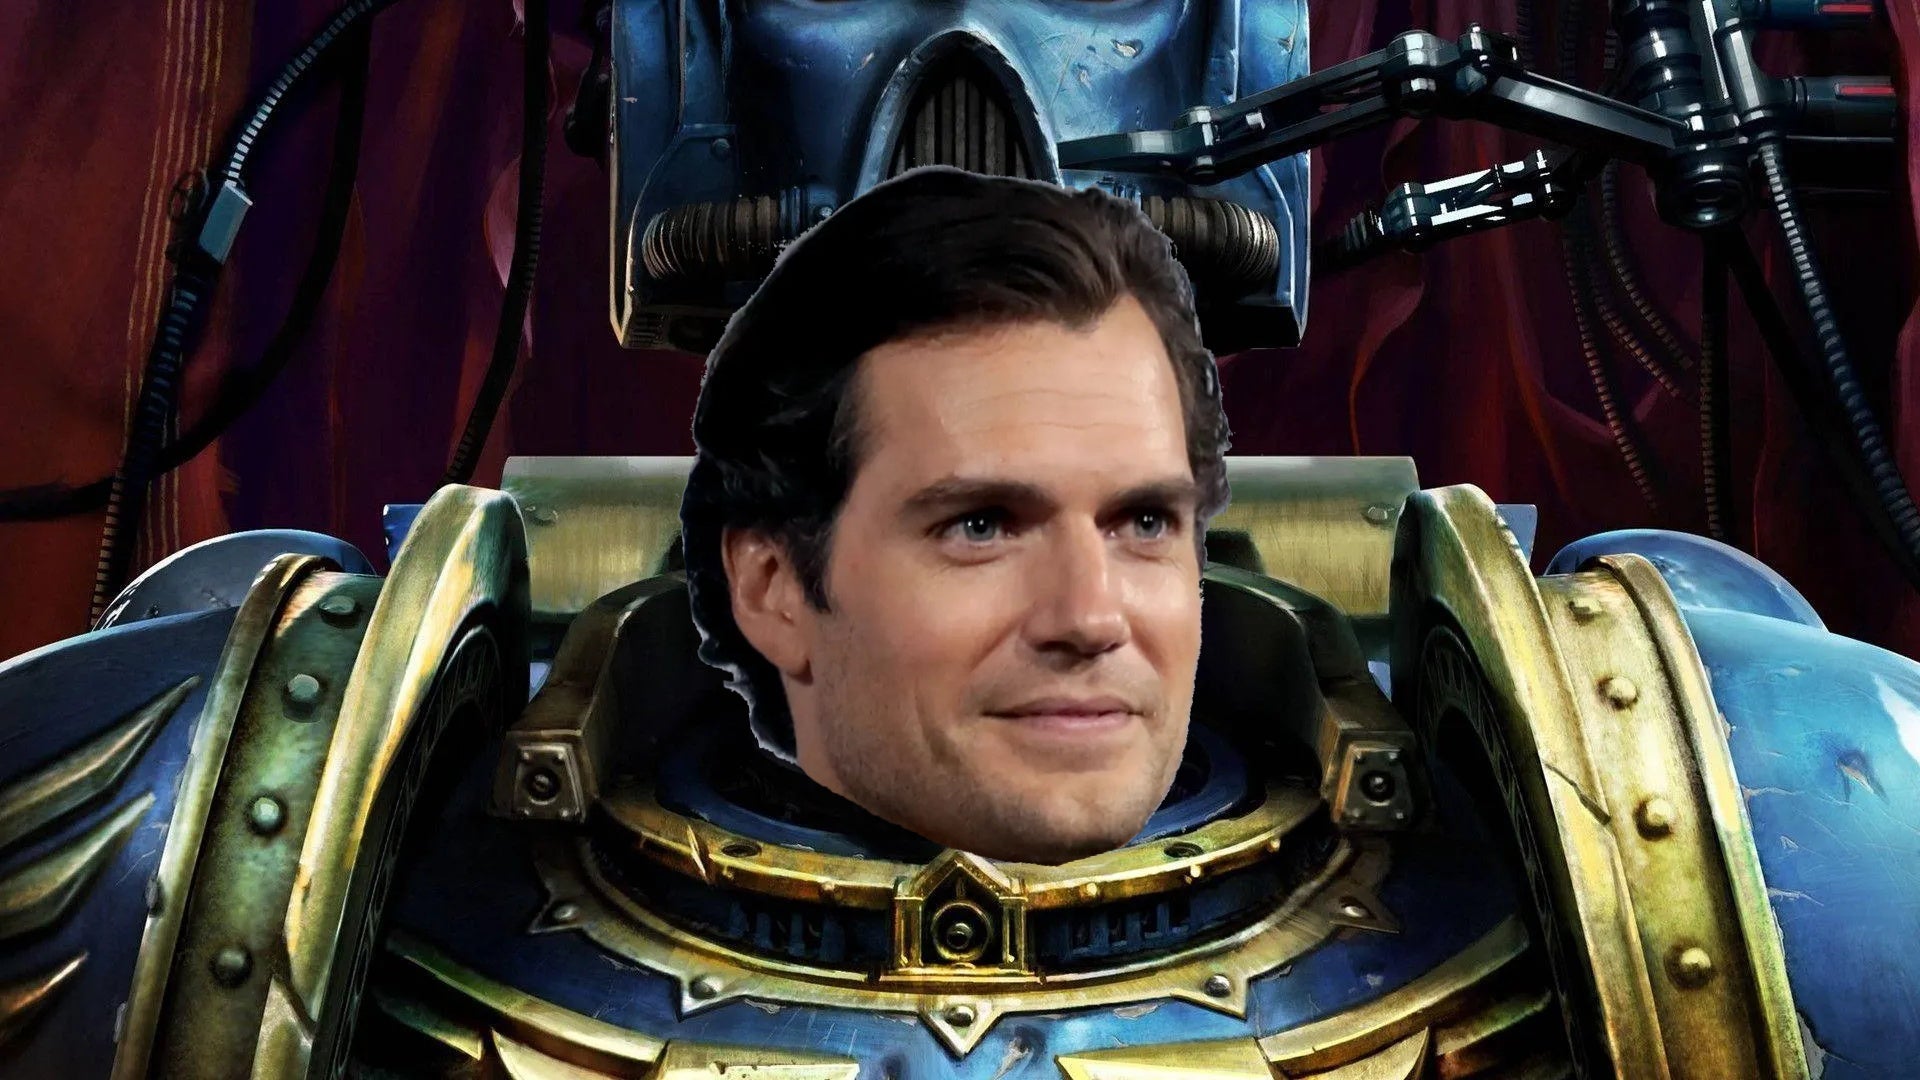 Art of a Warhammer 40K Space Marine putting on their helmet but with Henry Cavill's face